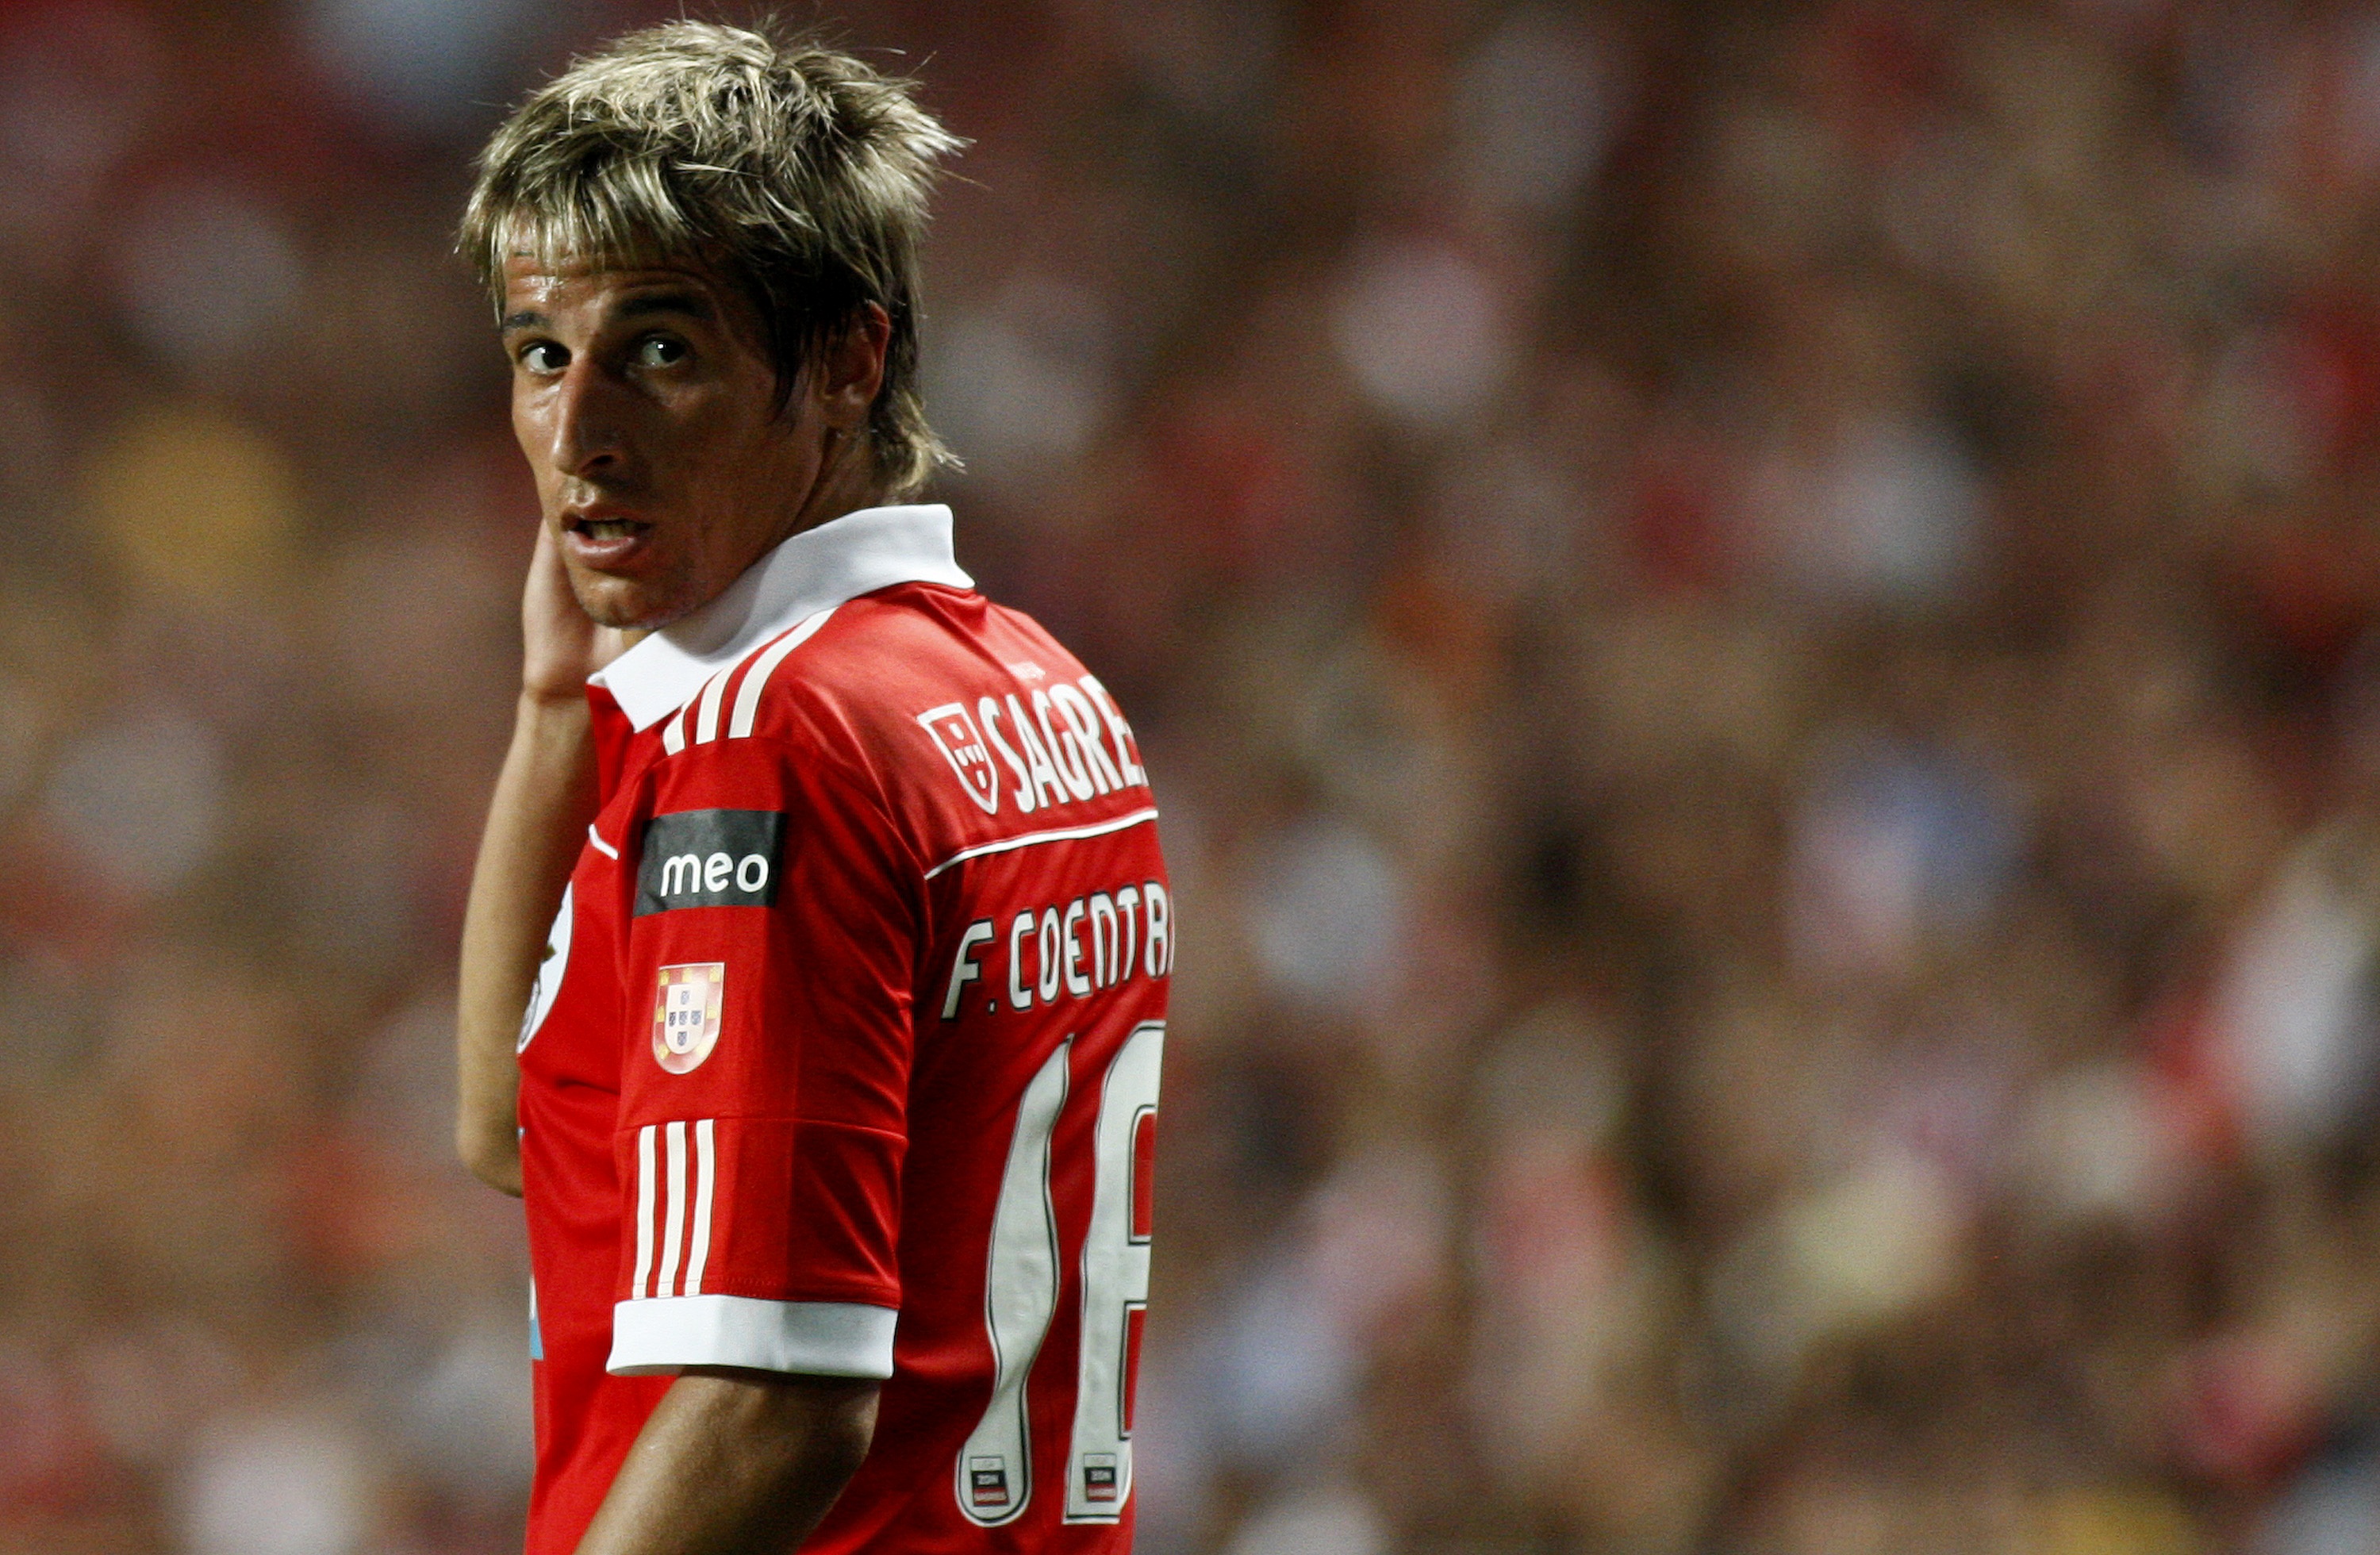 PORTUGAL - AUGUST 28:  Fabio Coentrao of Benfica looks on during the Portuguese Liga match between Benfica and Vitoria Setubal at Luz Stadium on August 28, 2010 in Lisbon, Portugal.  (Photo by Patricia de Melo/EuroFootball/Getty Images)